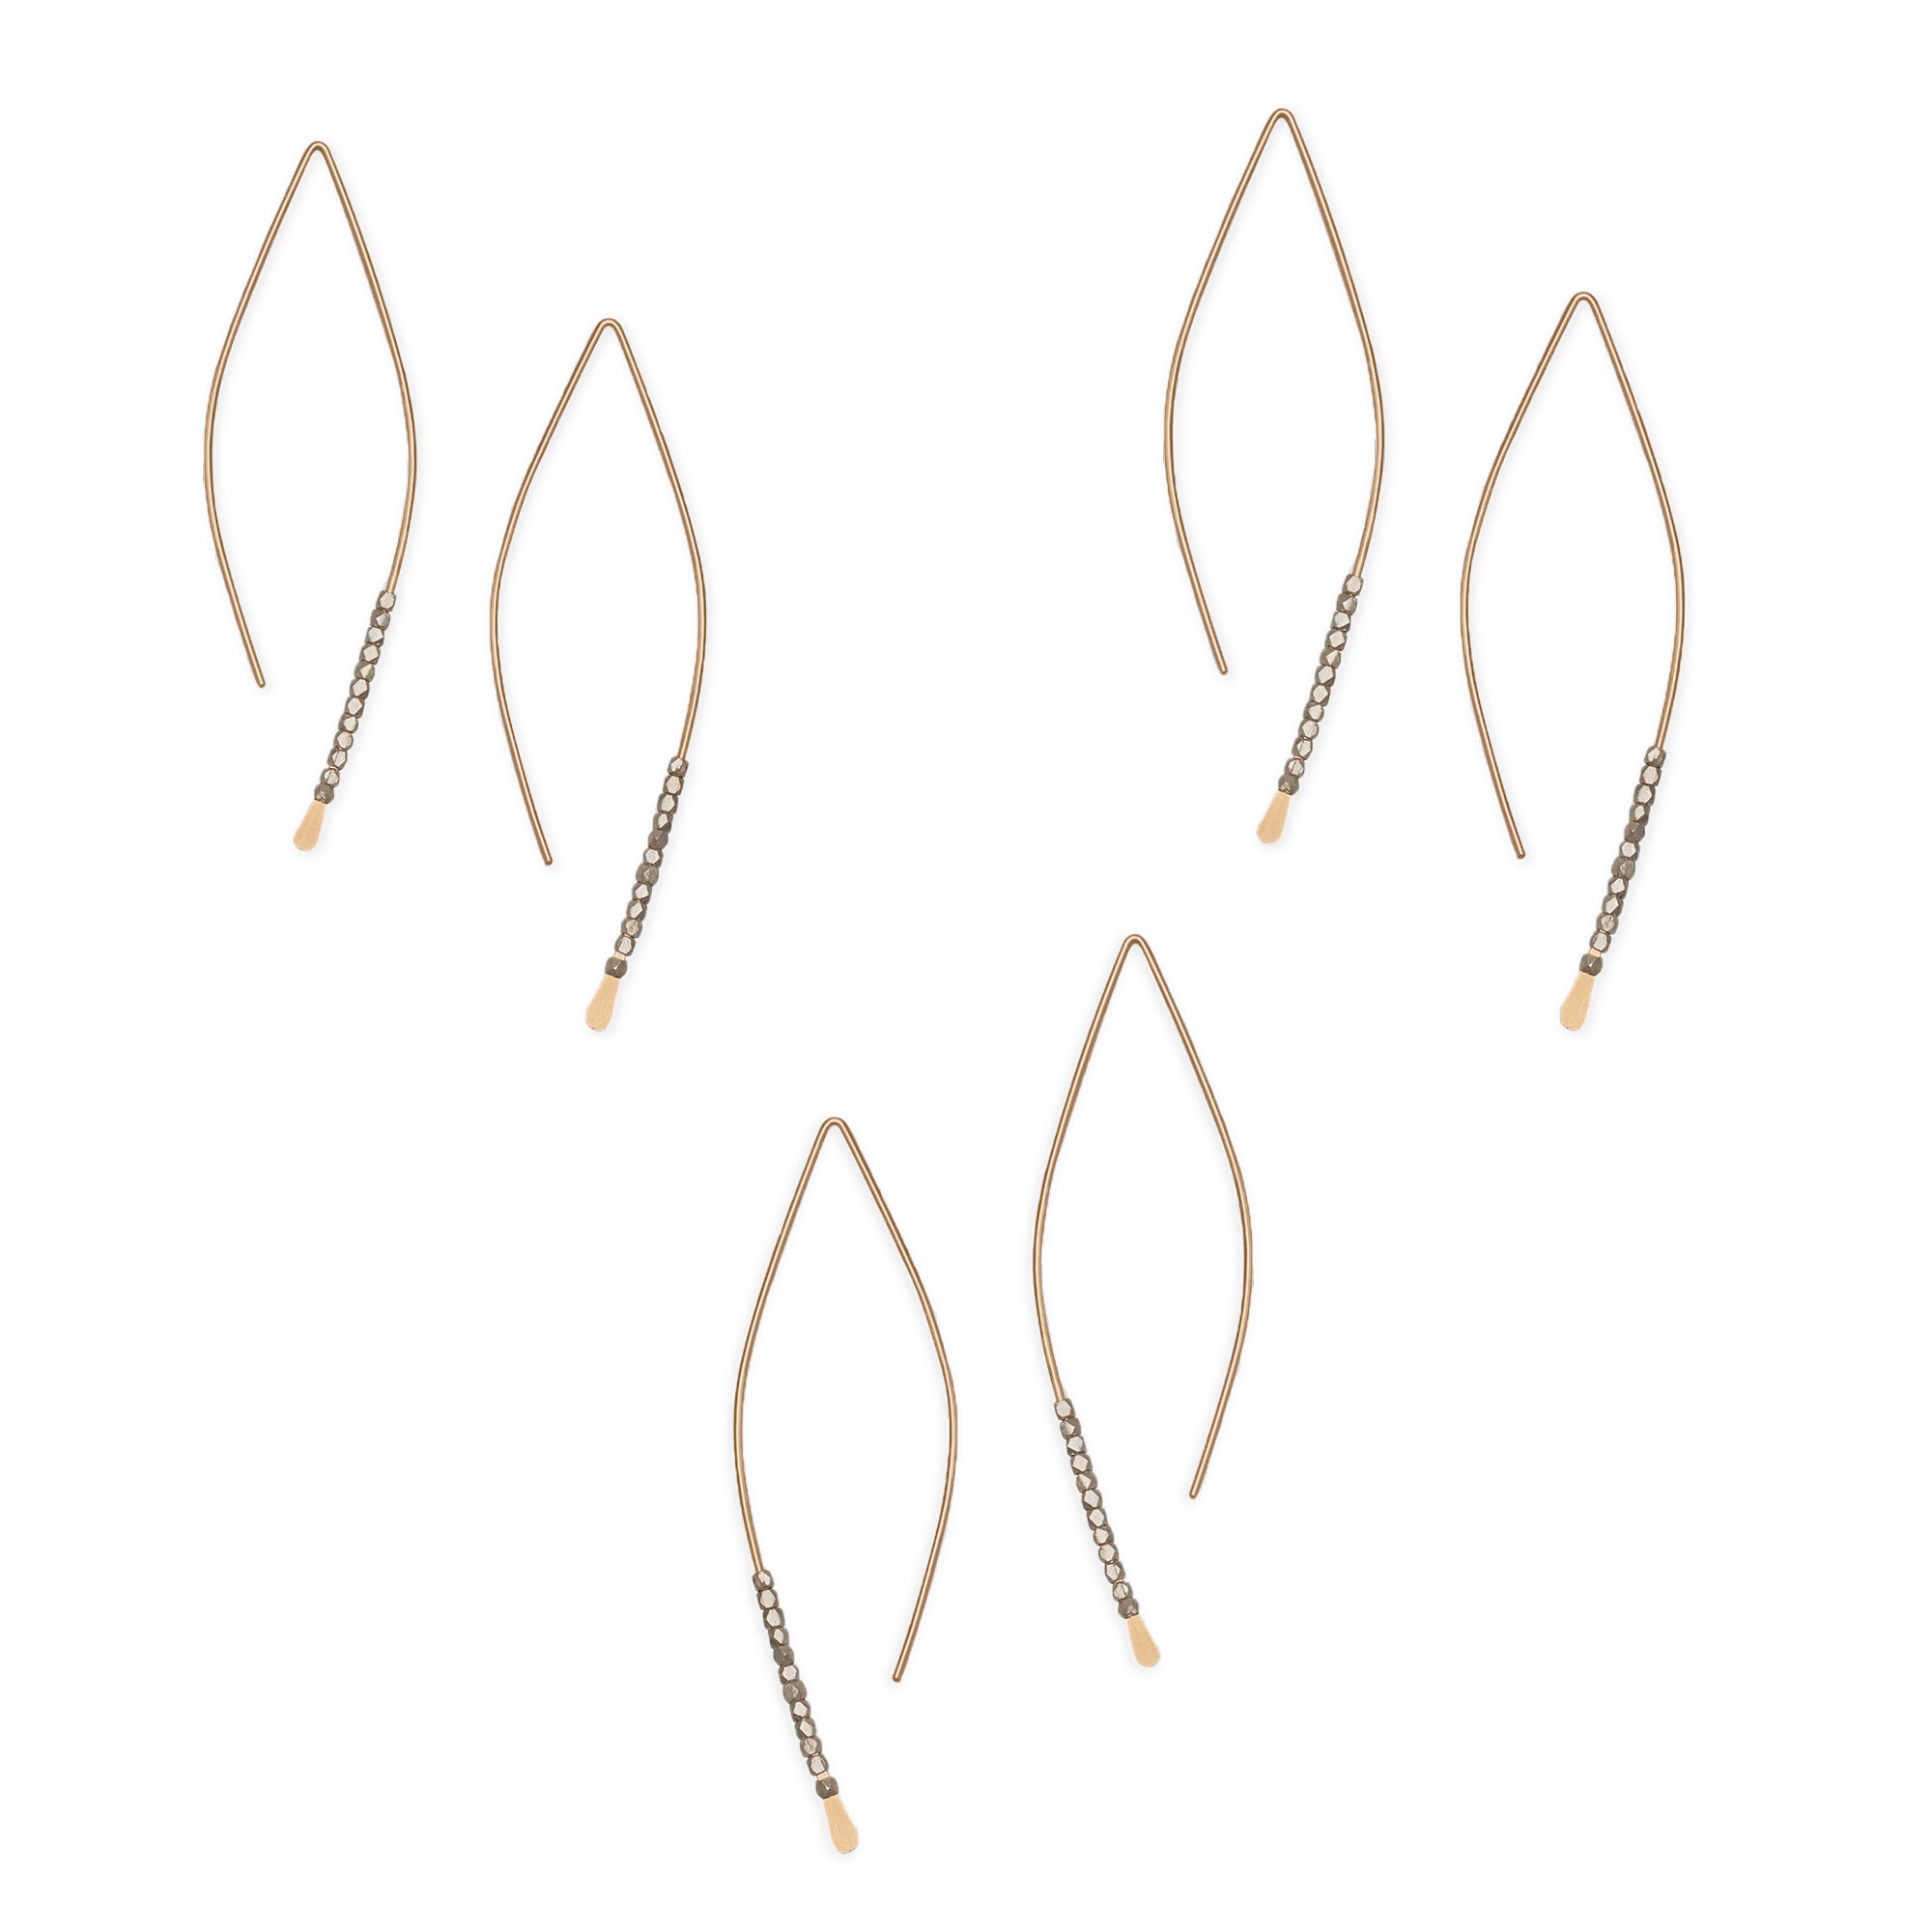 Wedding Party Set: the thin, hammered wire of the Bead Crescent Earrings is adorned with sterling silver beads 